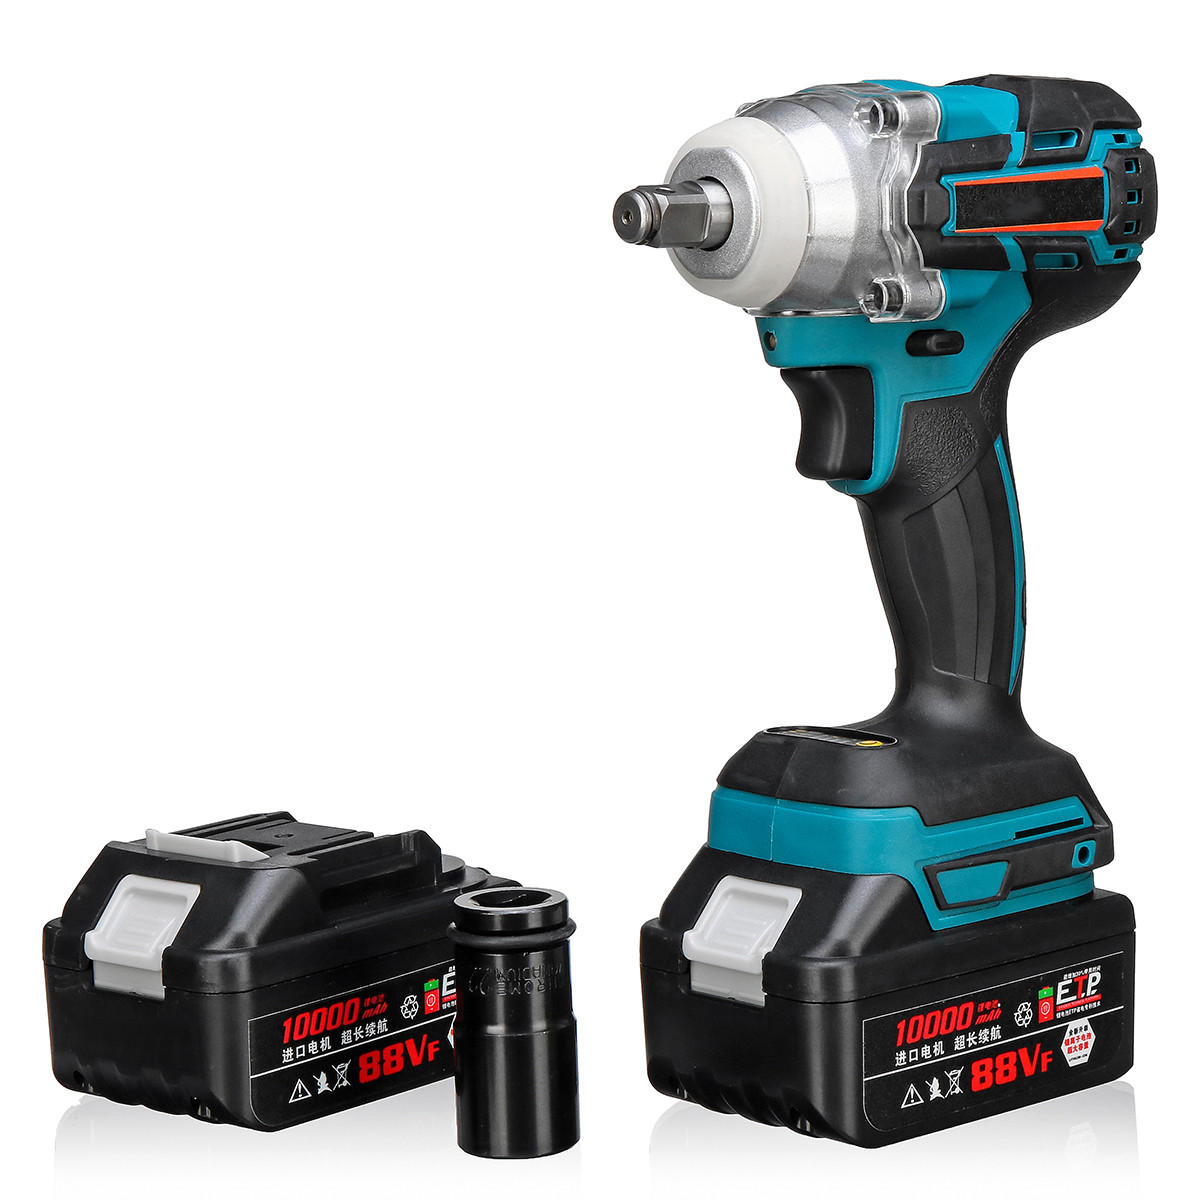 Image of 21V 330Nm 10000mAh Lithium Electric Impact Wrench Cordless with 2 Batteries